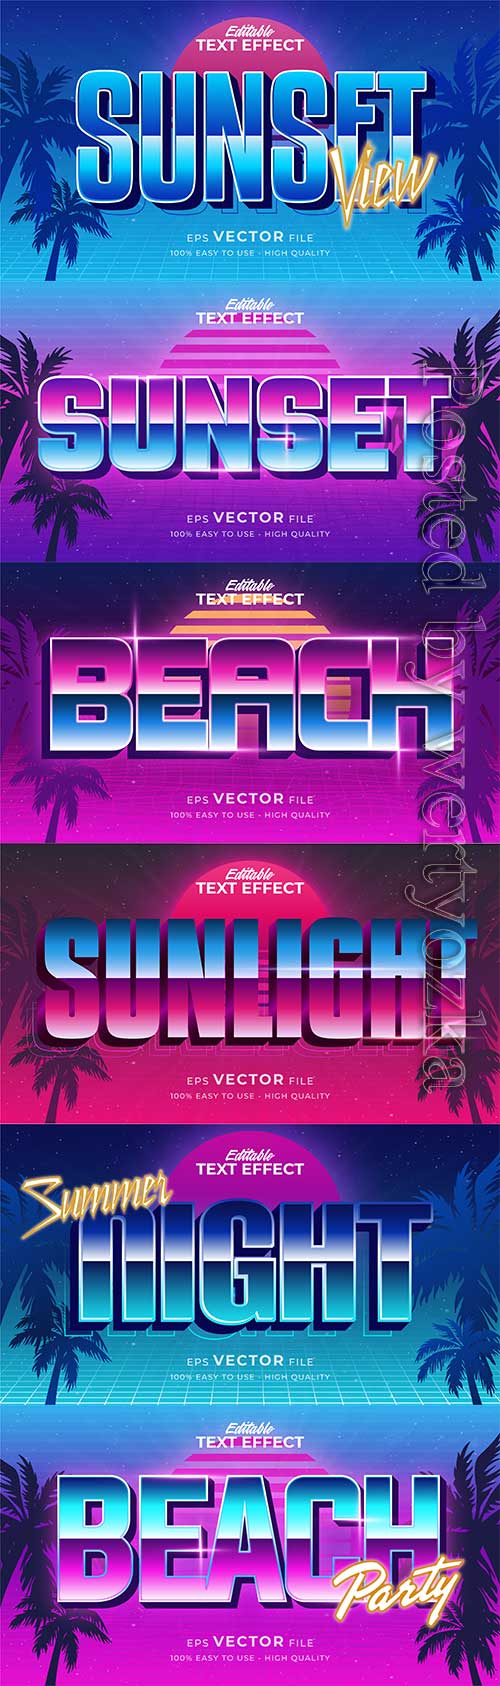 Retro summer holiday text in grunge style theme in vector vol 13